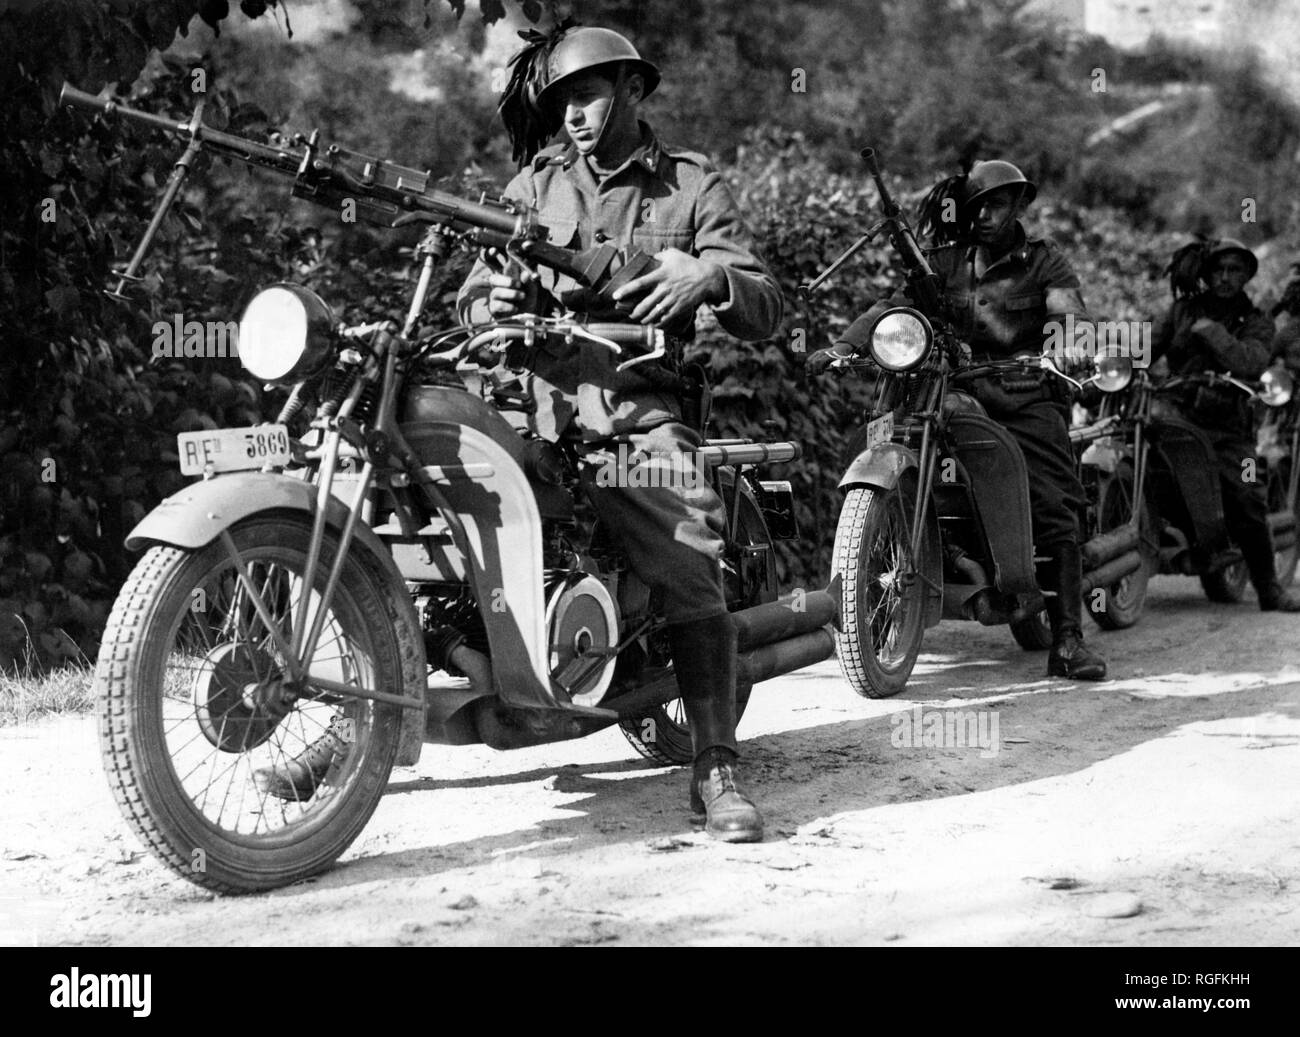 motorcyclist soldiers, 1939-45 Stock Photo